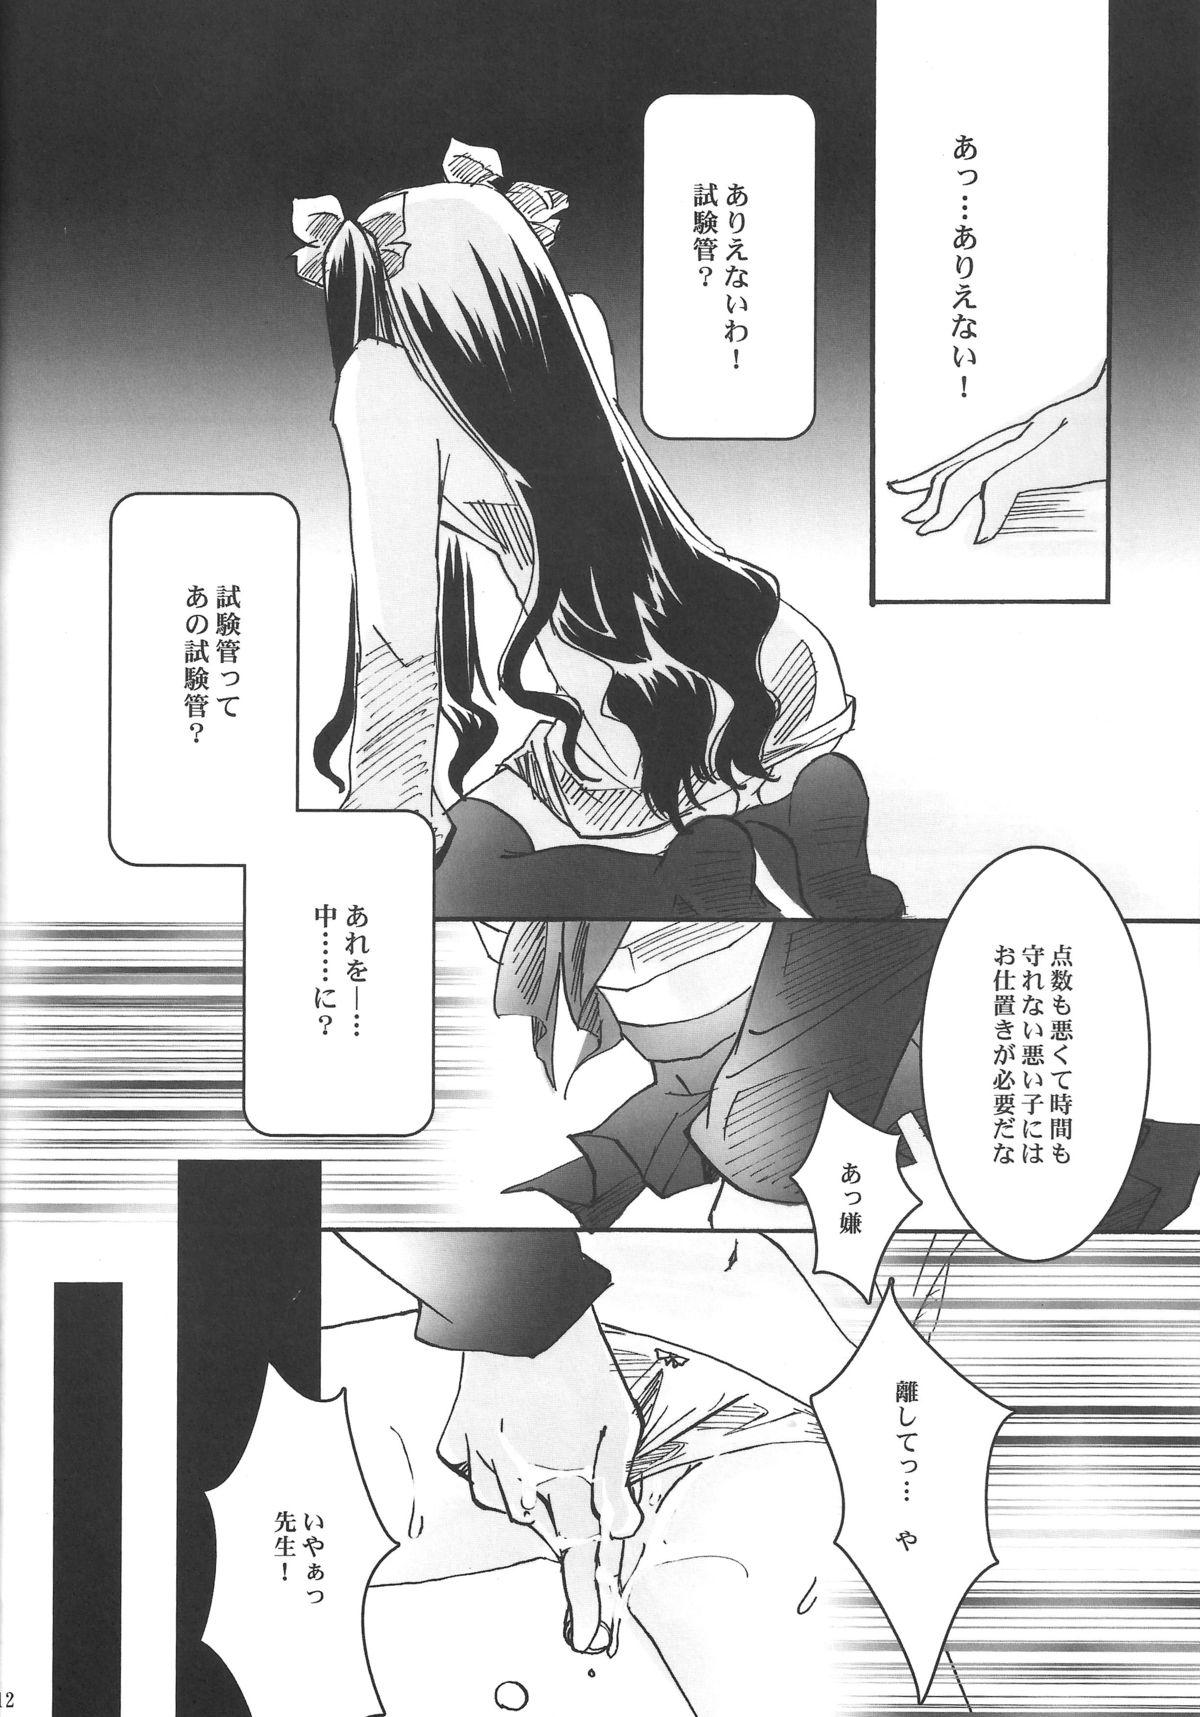 Domination Himitsu Nikki 1 - Fate stay night Two - Page 10